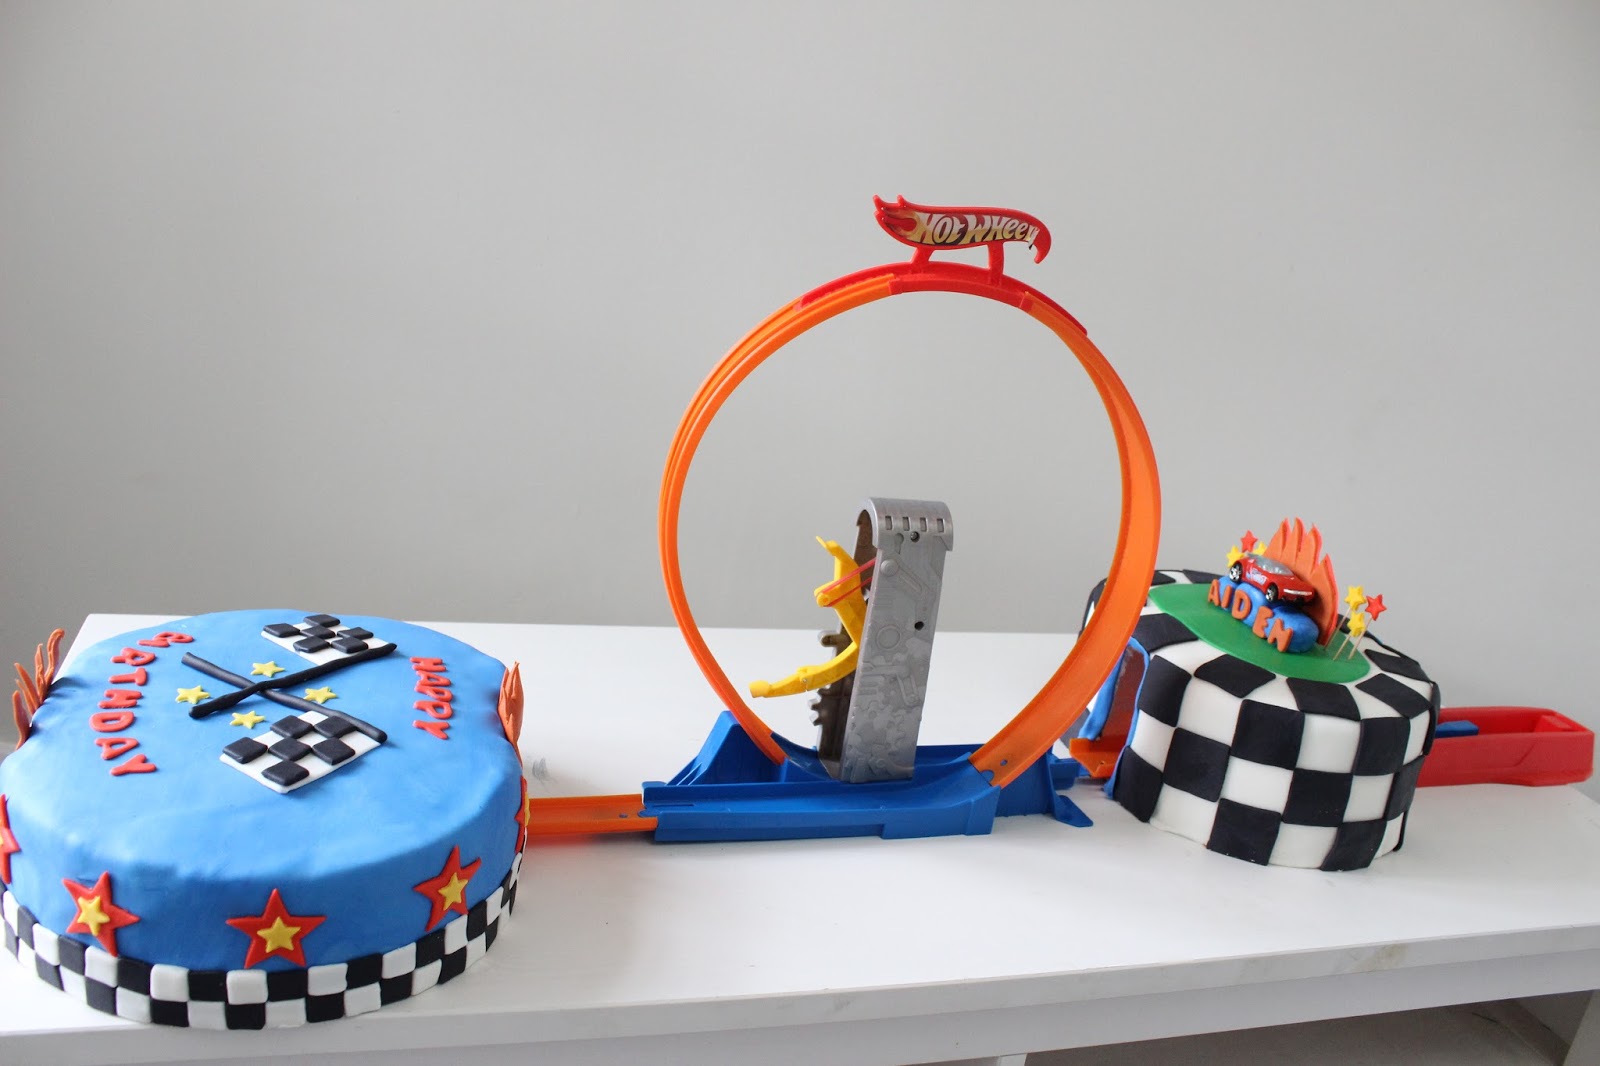 And another Hot Wheels Cake. hot wheels round track. 